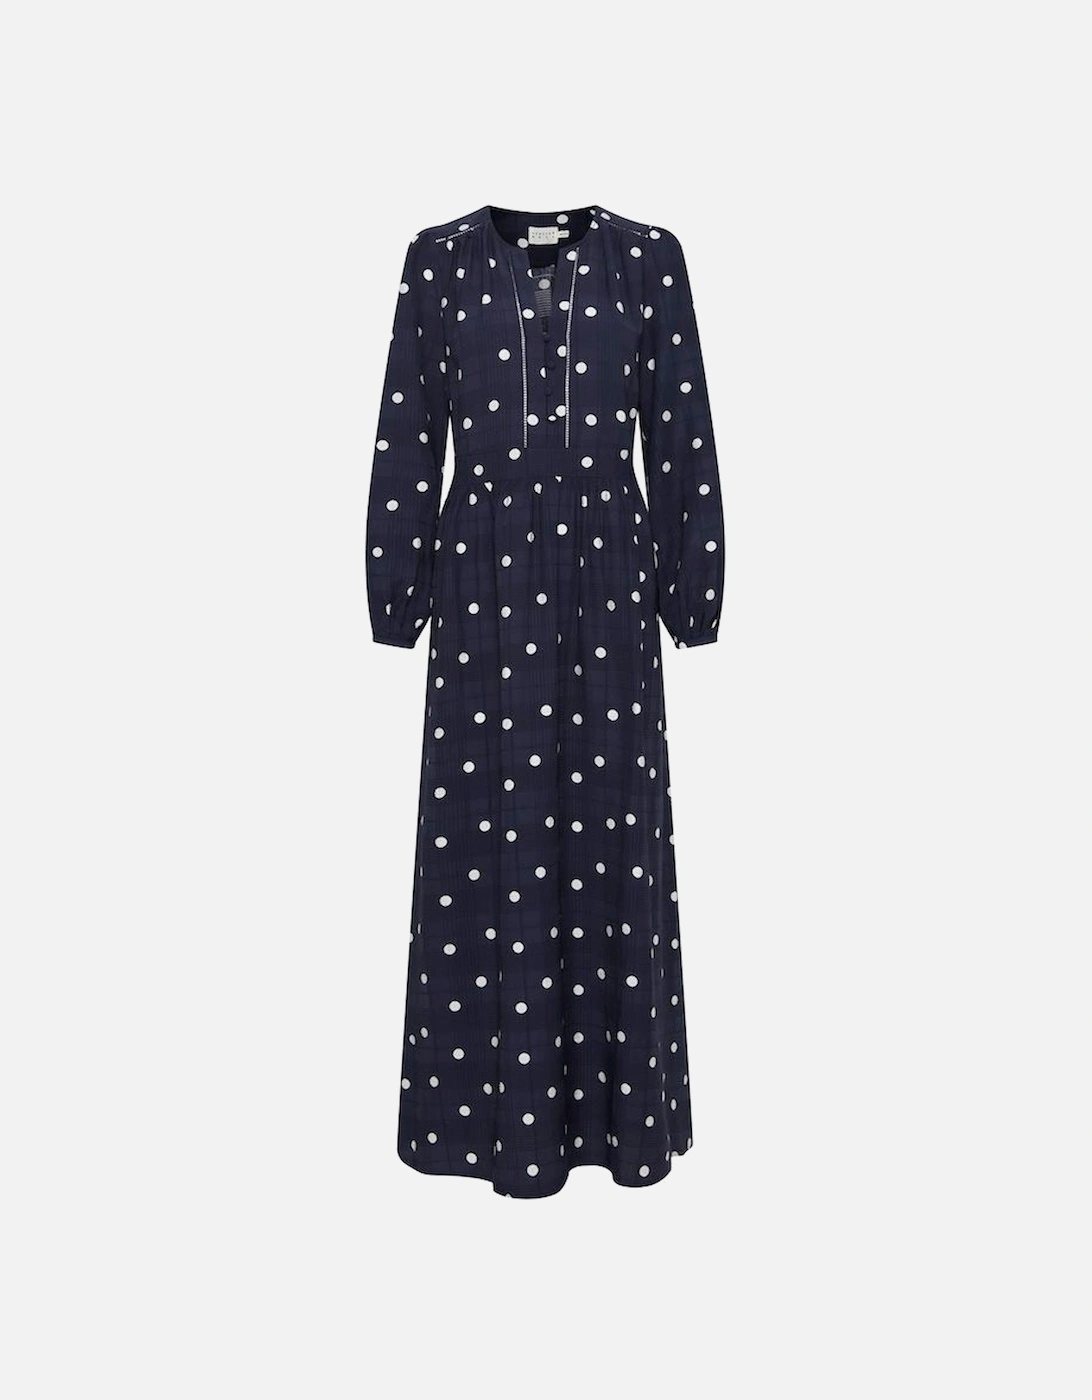 Maritime blue and snow white dot dress, 7 of 6